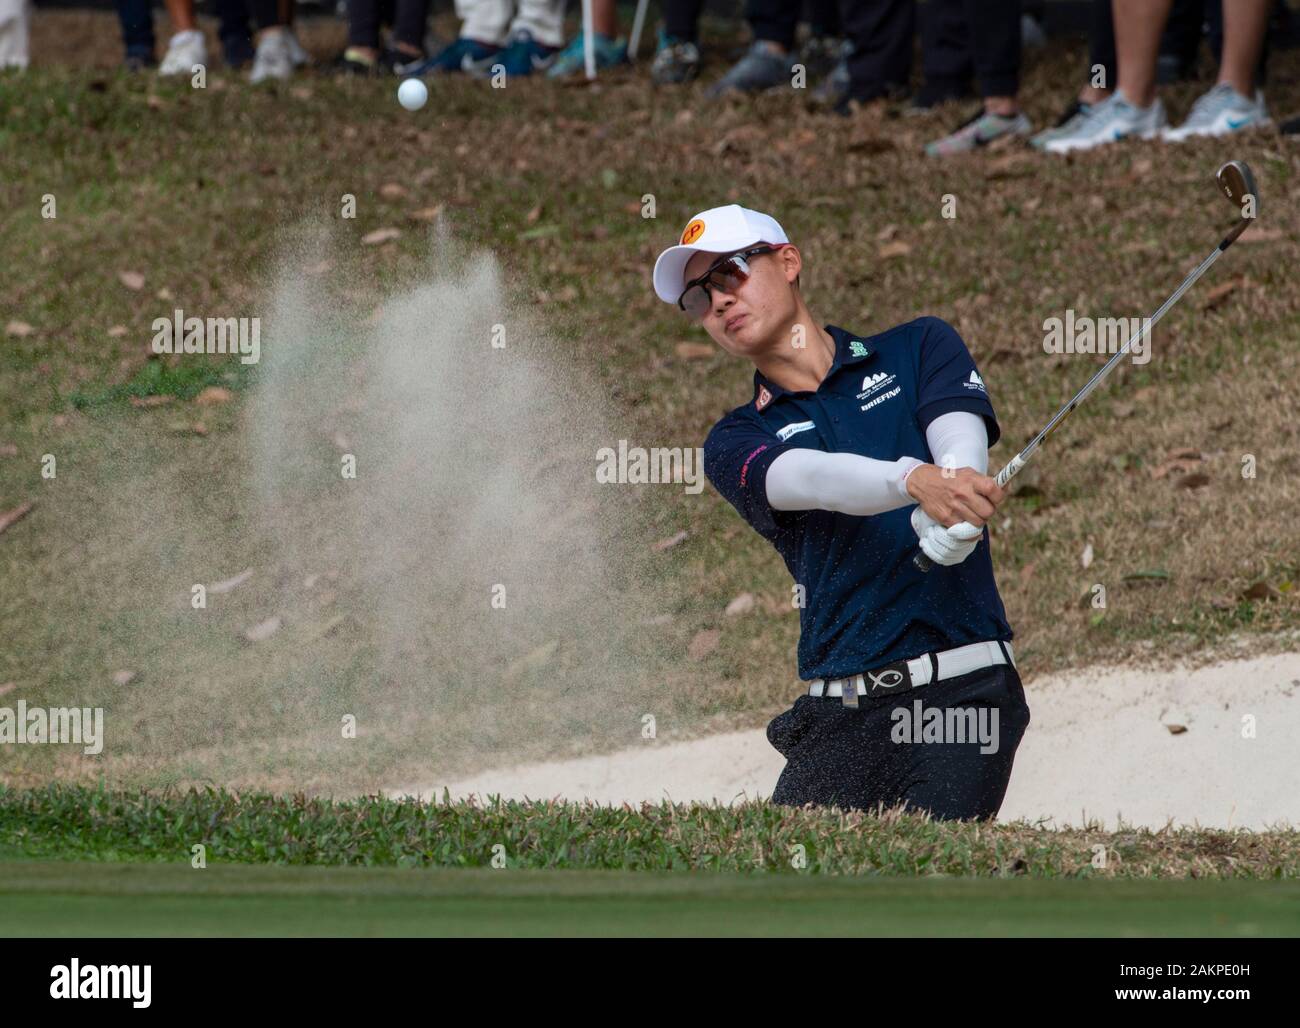 FANLING,HONG KONG SAR,CHINA: JANUARY 9th 2020. Hong Kong Open Golf Round 2. Jazz Janewattananond hits out of the bunker on the 15th green.Alamy Stock Stock Photo